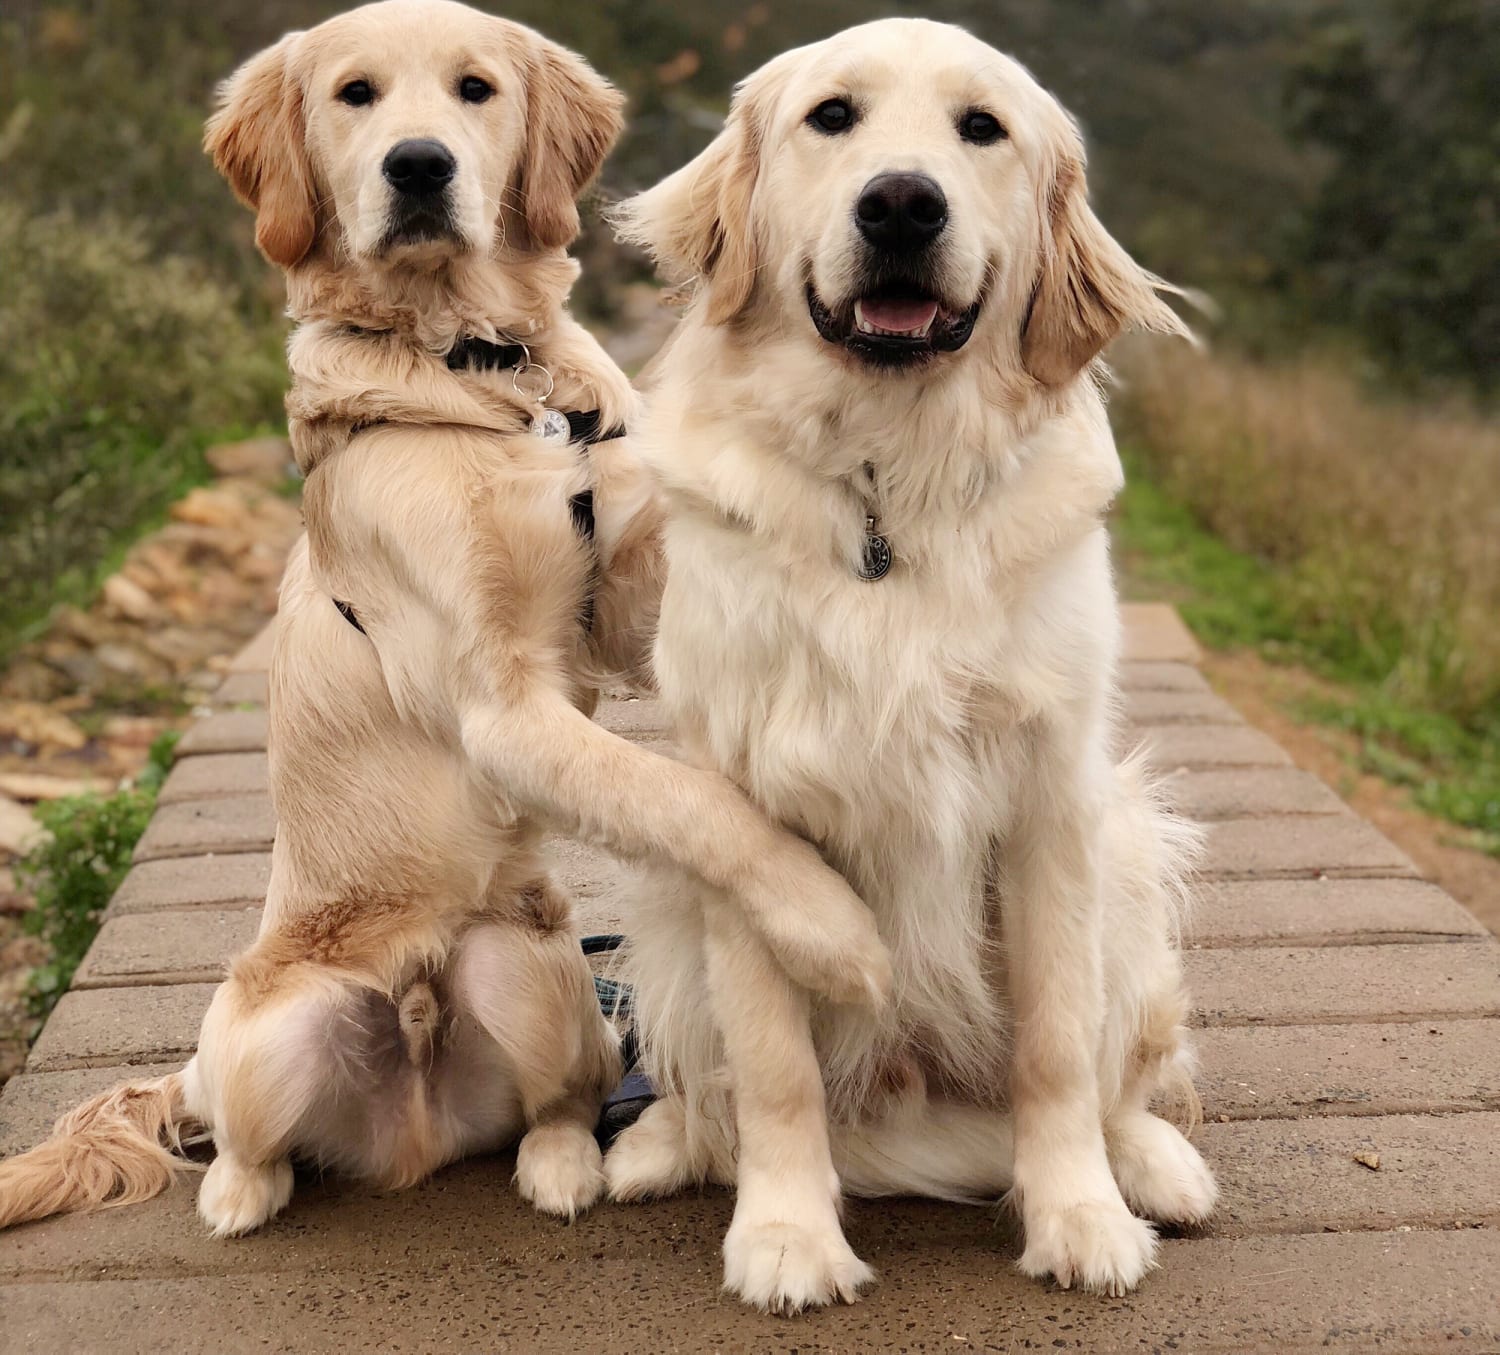 do golden retrievers get along with other dogs? 2